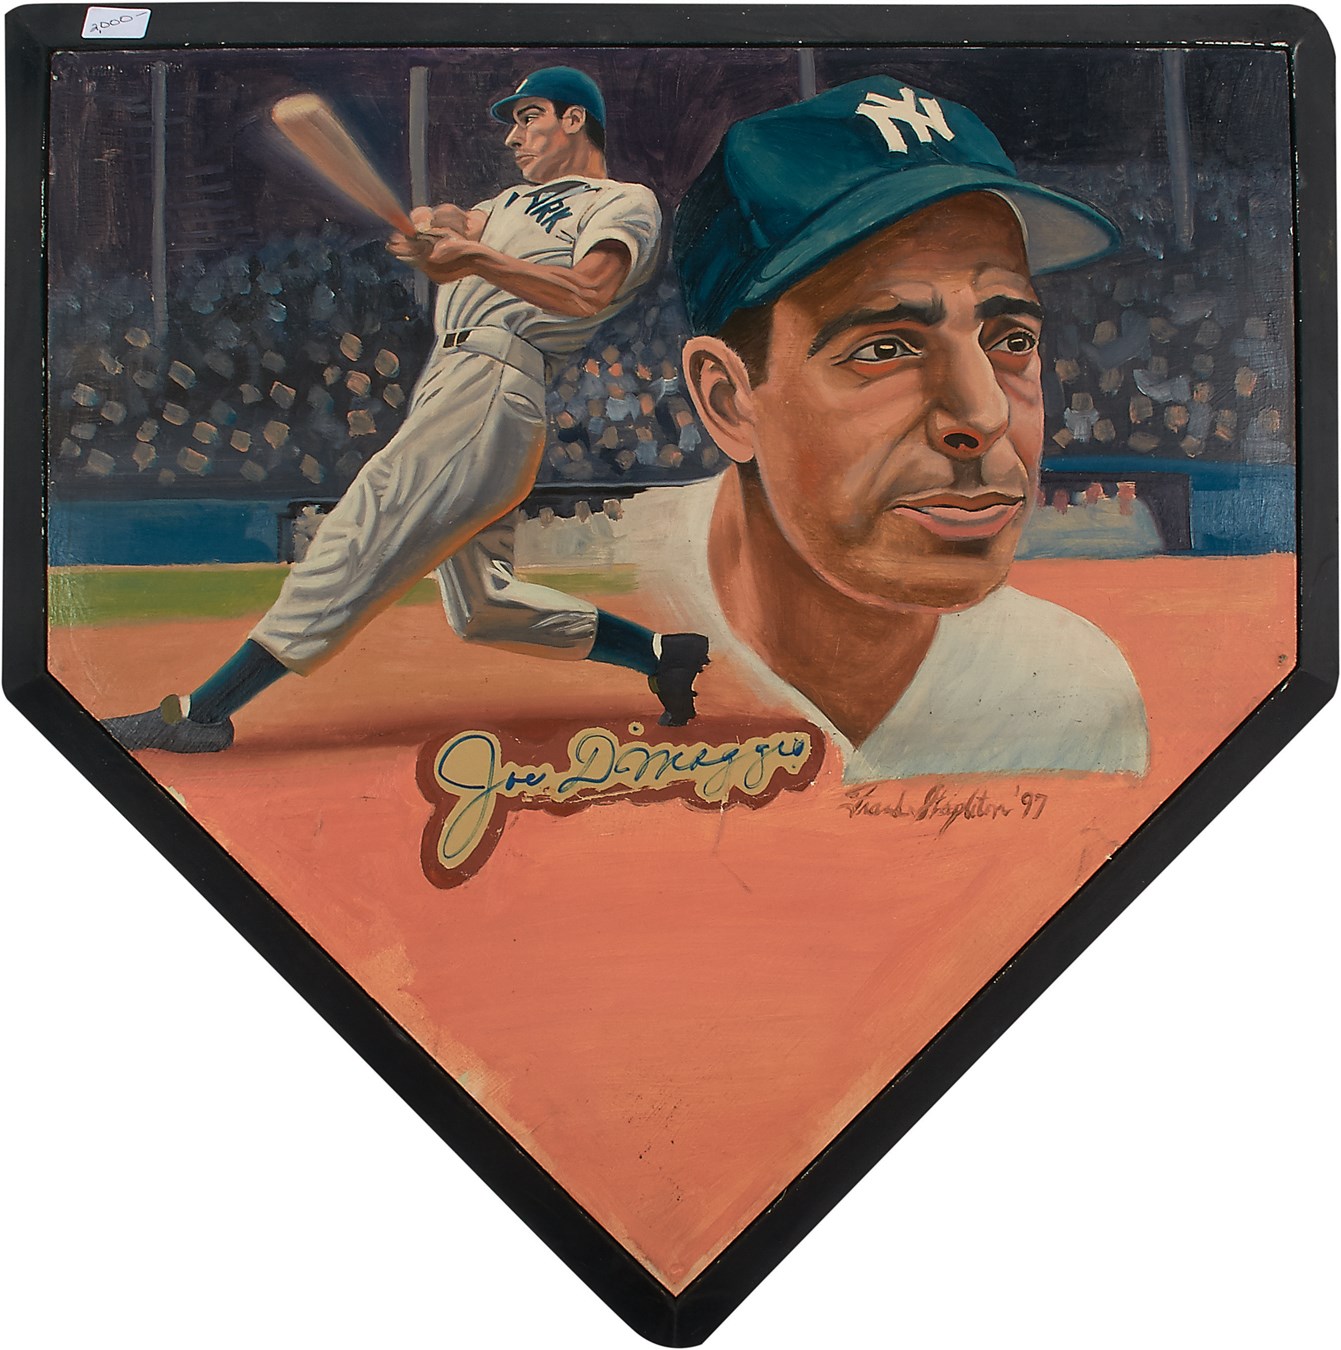 - Joe DiMaggio Signed Oil Painting on Home Plate by Frank Stapleton (JSA)